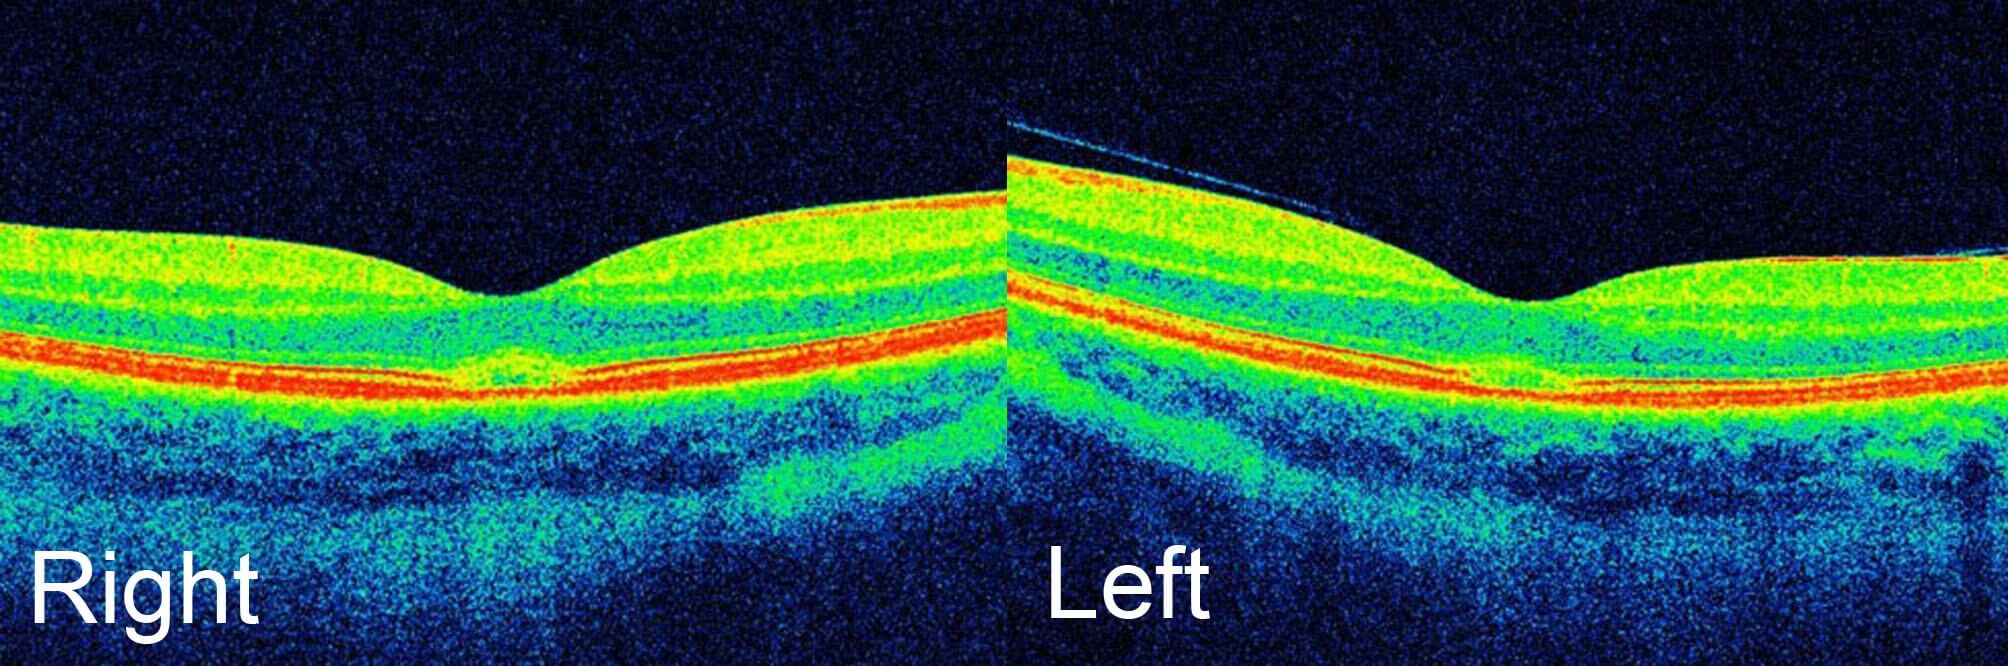 Optical coherence tomography scans six weeks after reduced popper use demonstrating persisting subfoveal disruption of the ellipsoid layer but some flattening of the dome shaped elevation.